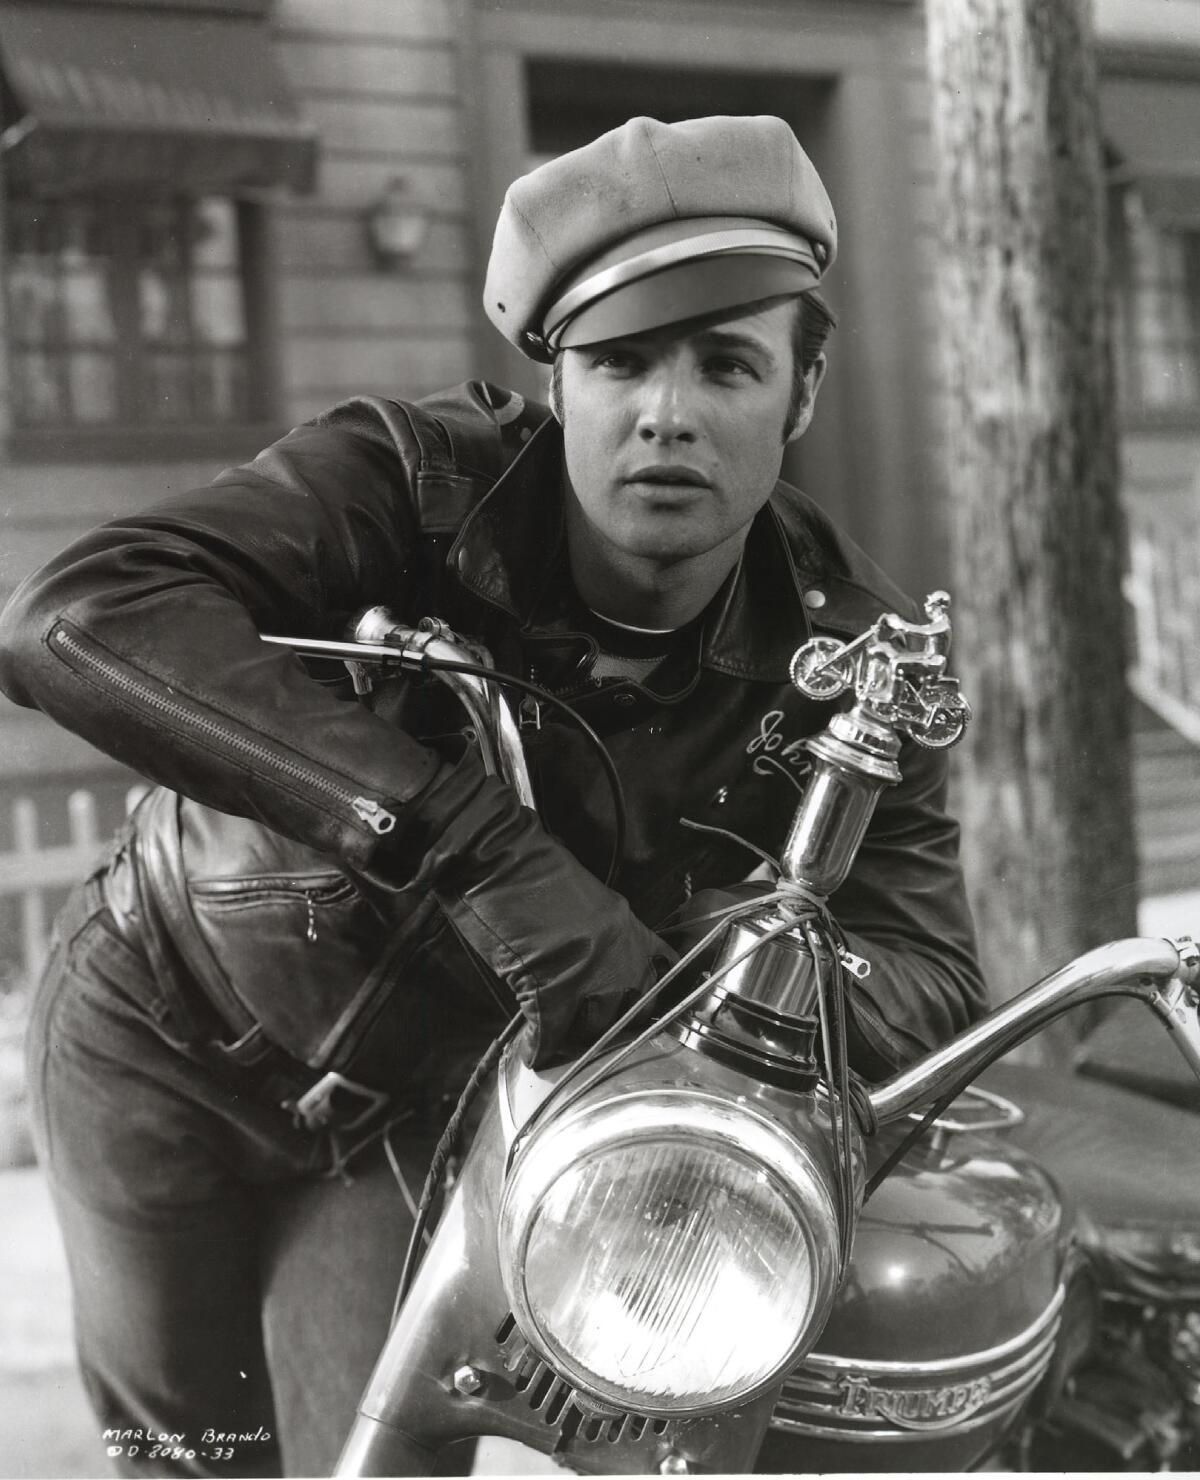 A young Marlon Brando in a leather jacket and on a motorcycle